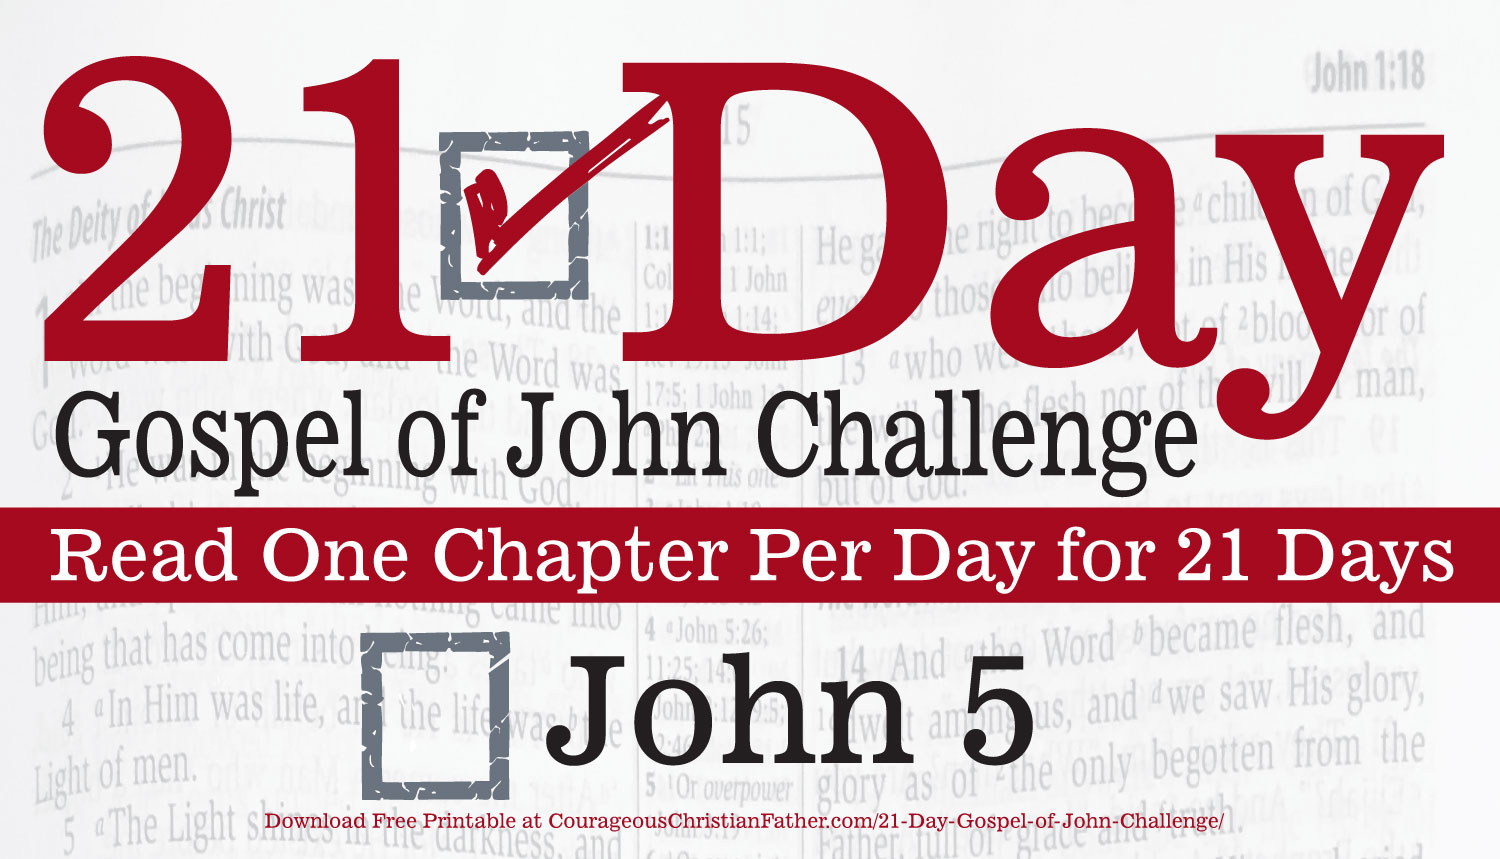 John 5 - It's day 5 of the 21 Day Gospel of John Challenge. Today you will need to read the 5th chapter of the Gospel of John. #John5